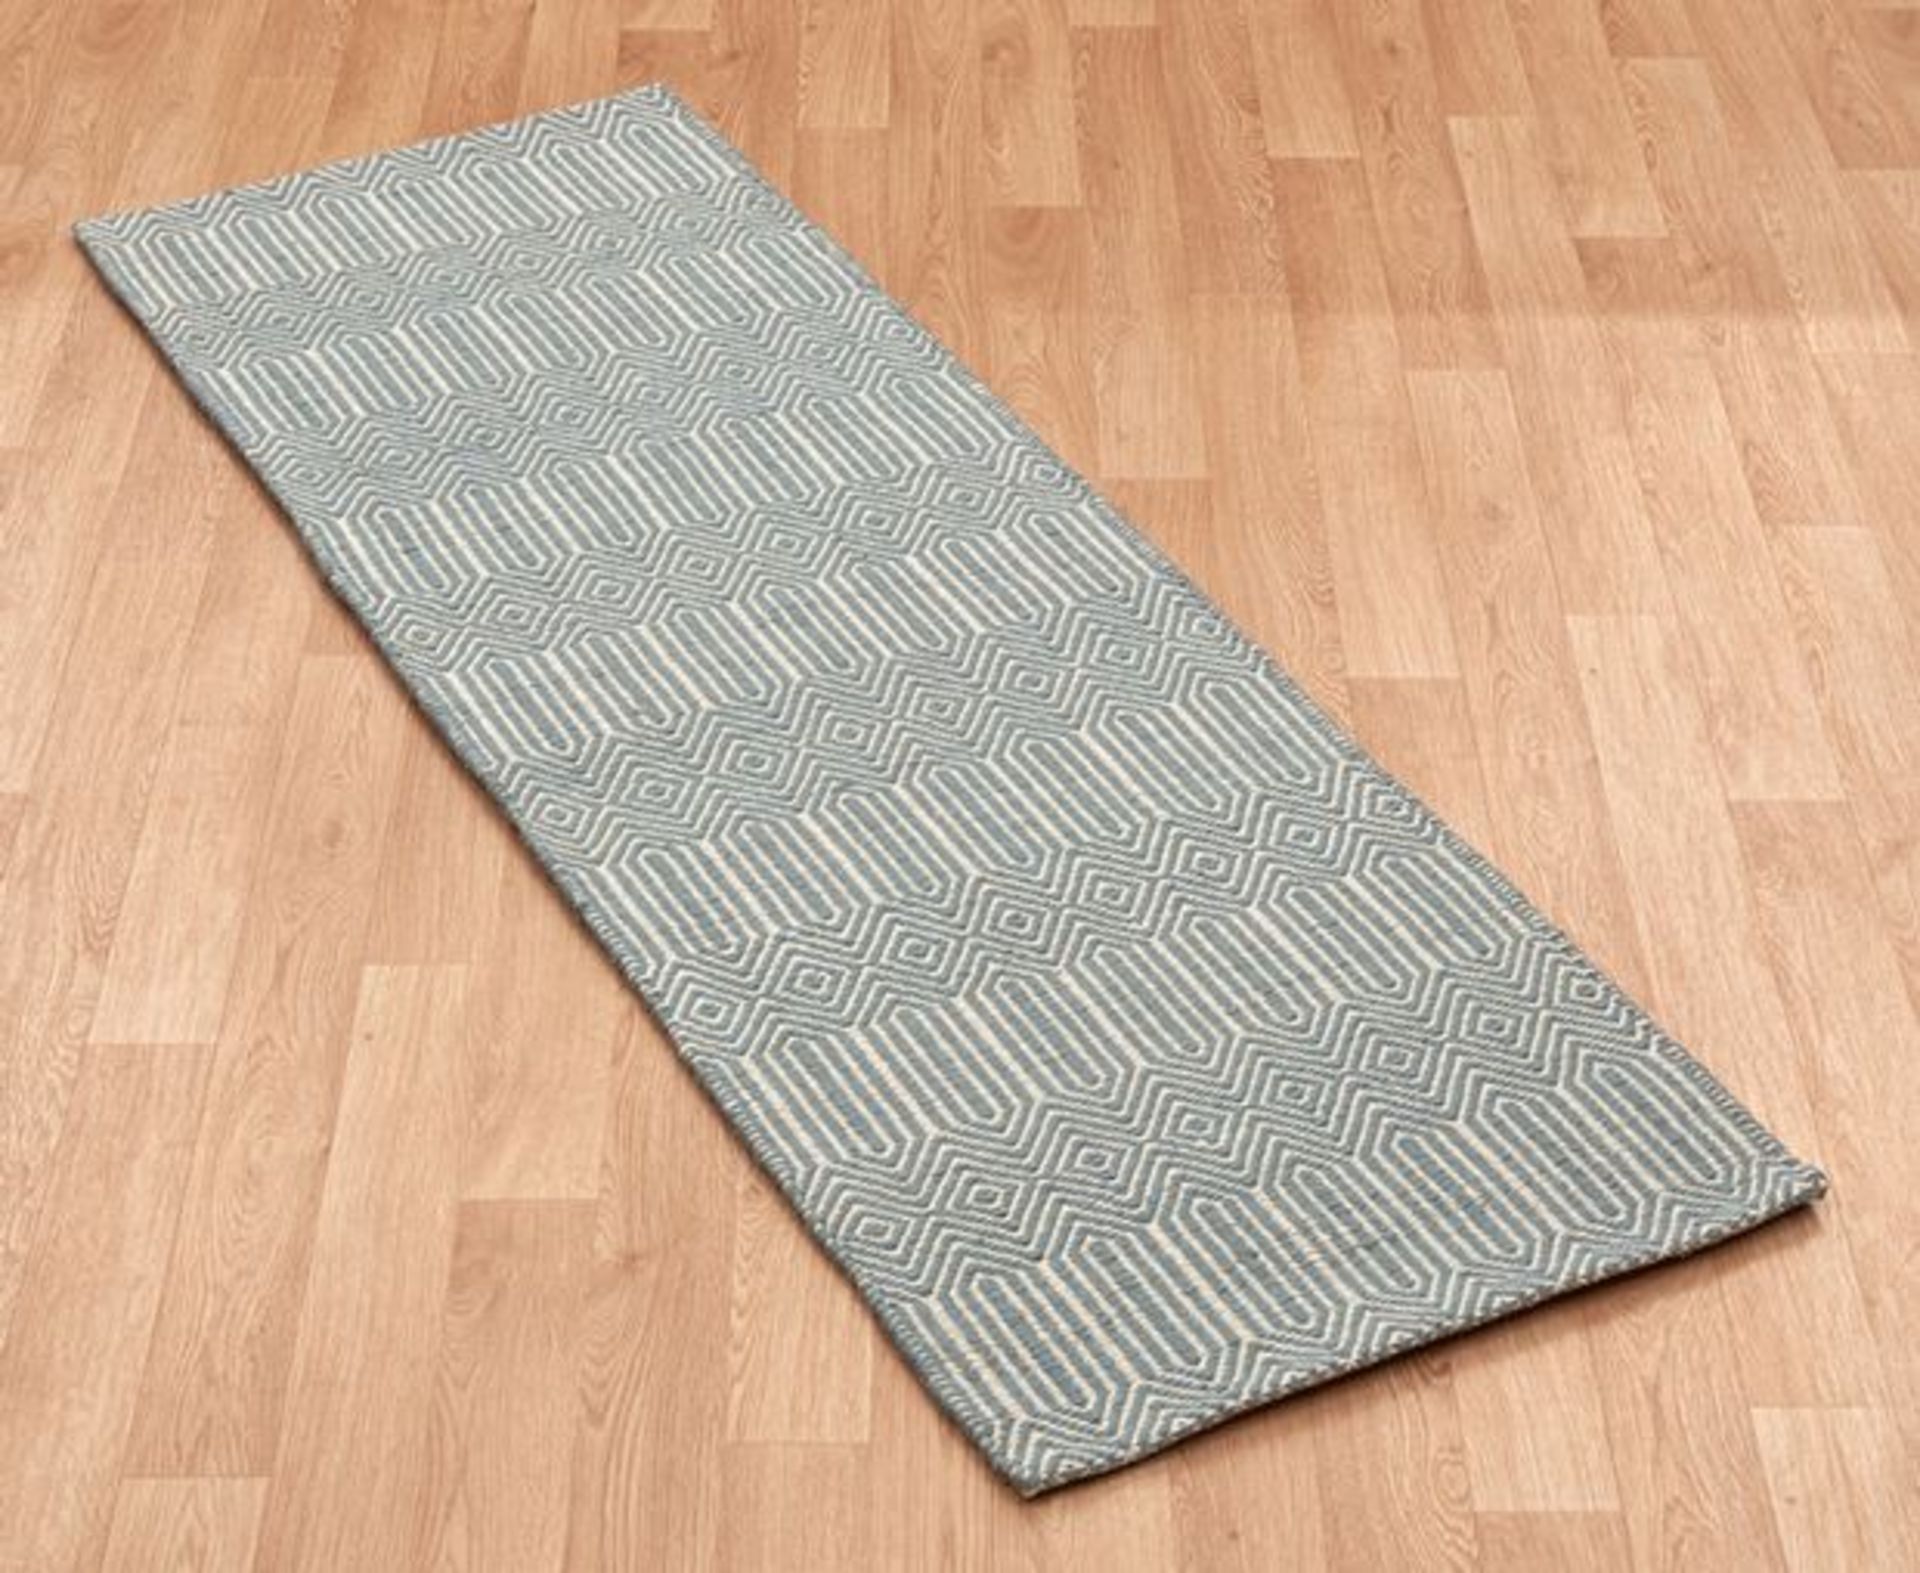 1 x Asiatic Sloan Wool Rich Runner Rug - Colour: Duck Egg - Dimensions: 60 x 200cm - New Sealed